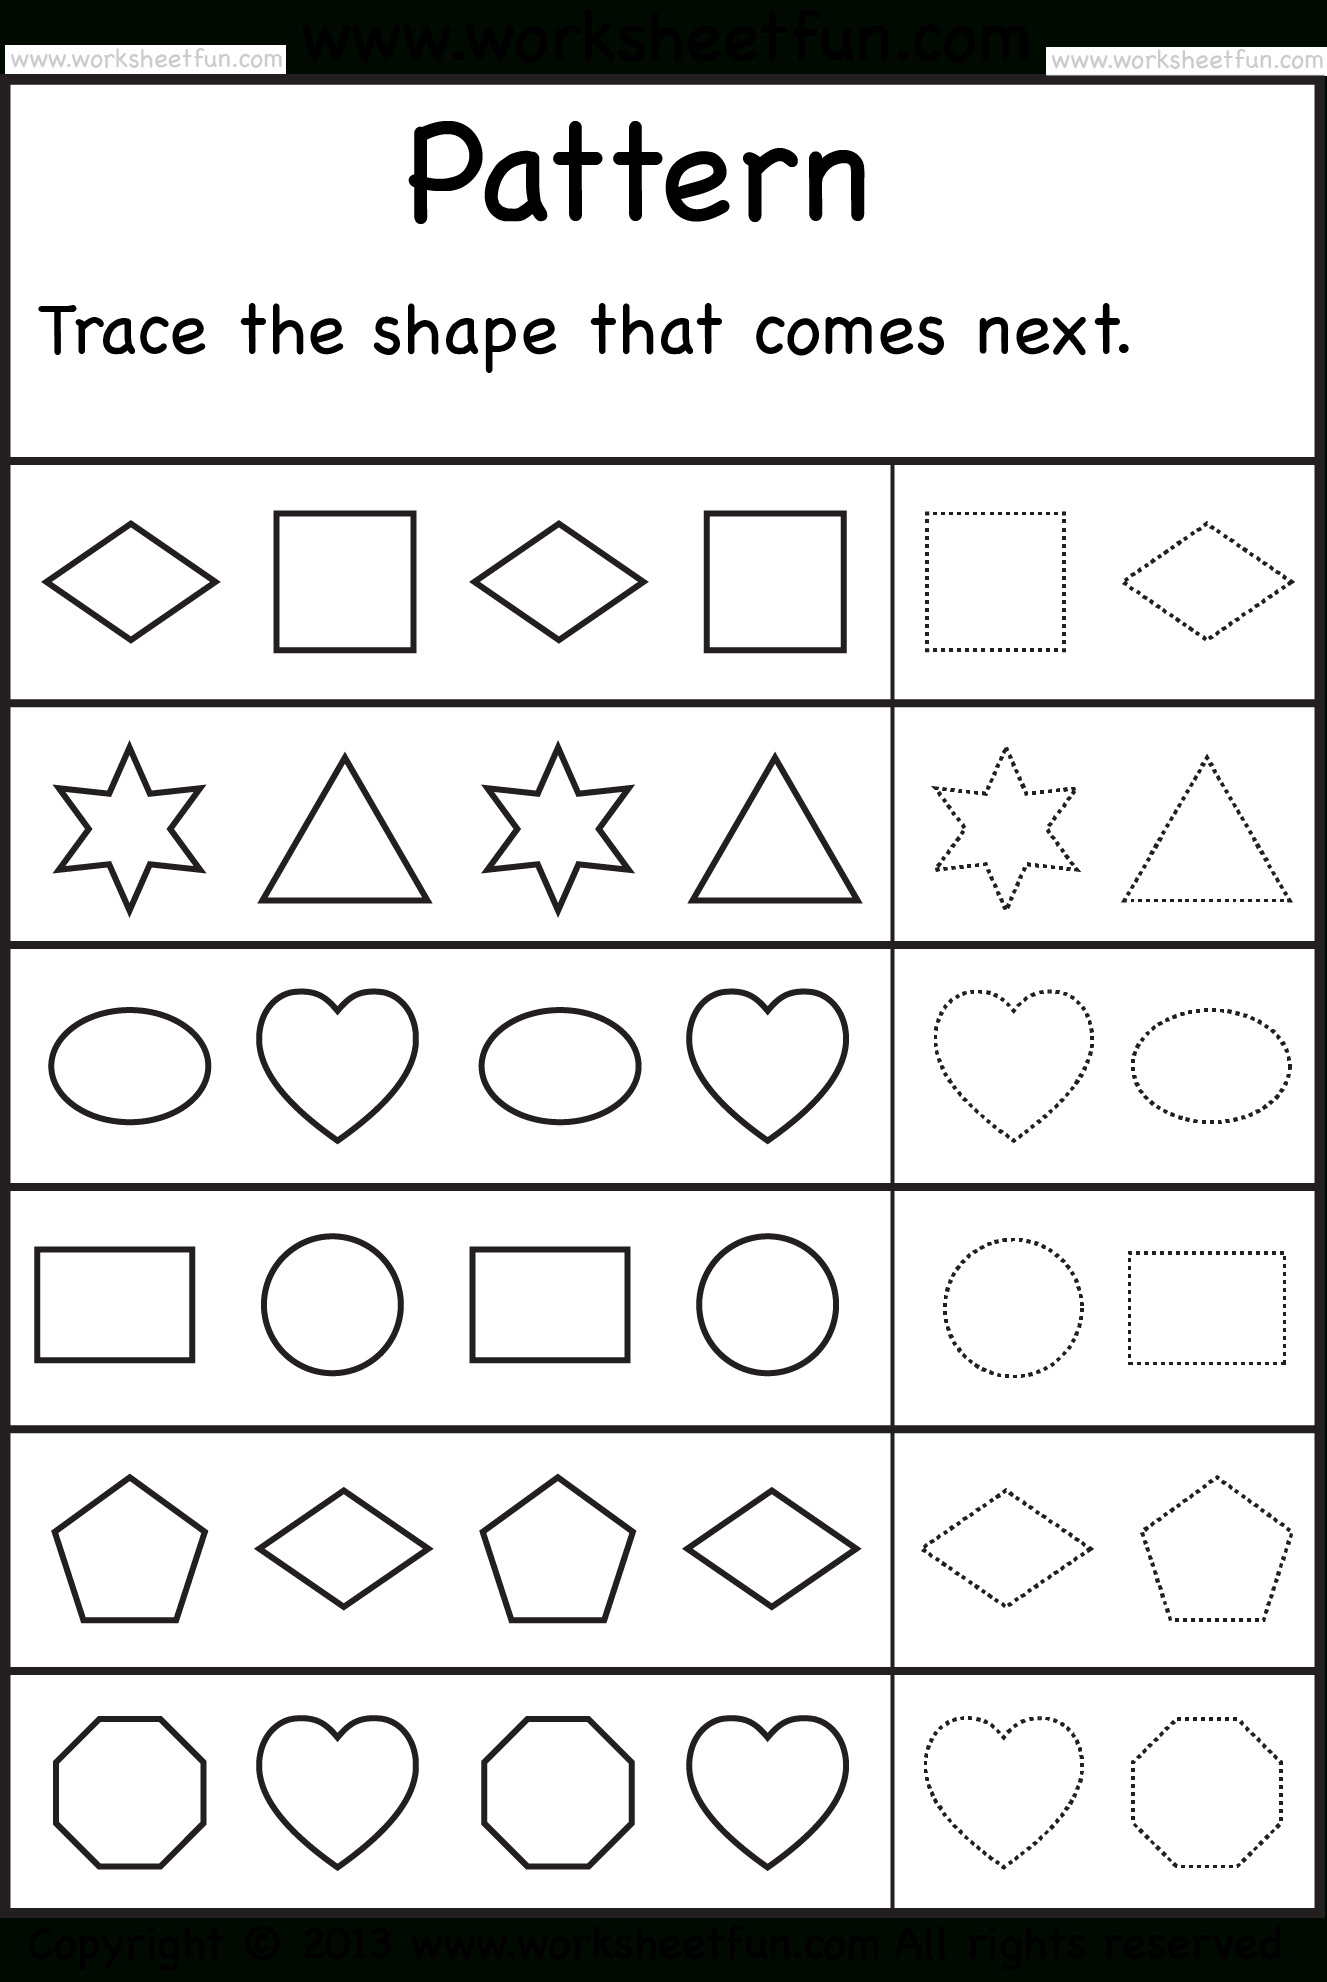 Patterns – Trace The Shape That Comes Next – One Worksheet  Free Along With Pattern Worksheets For Preschool